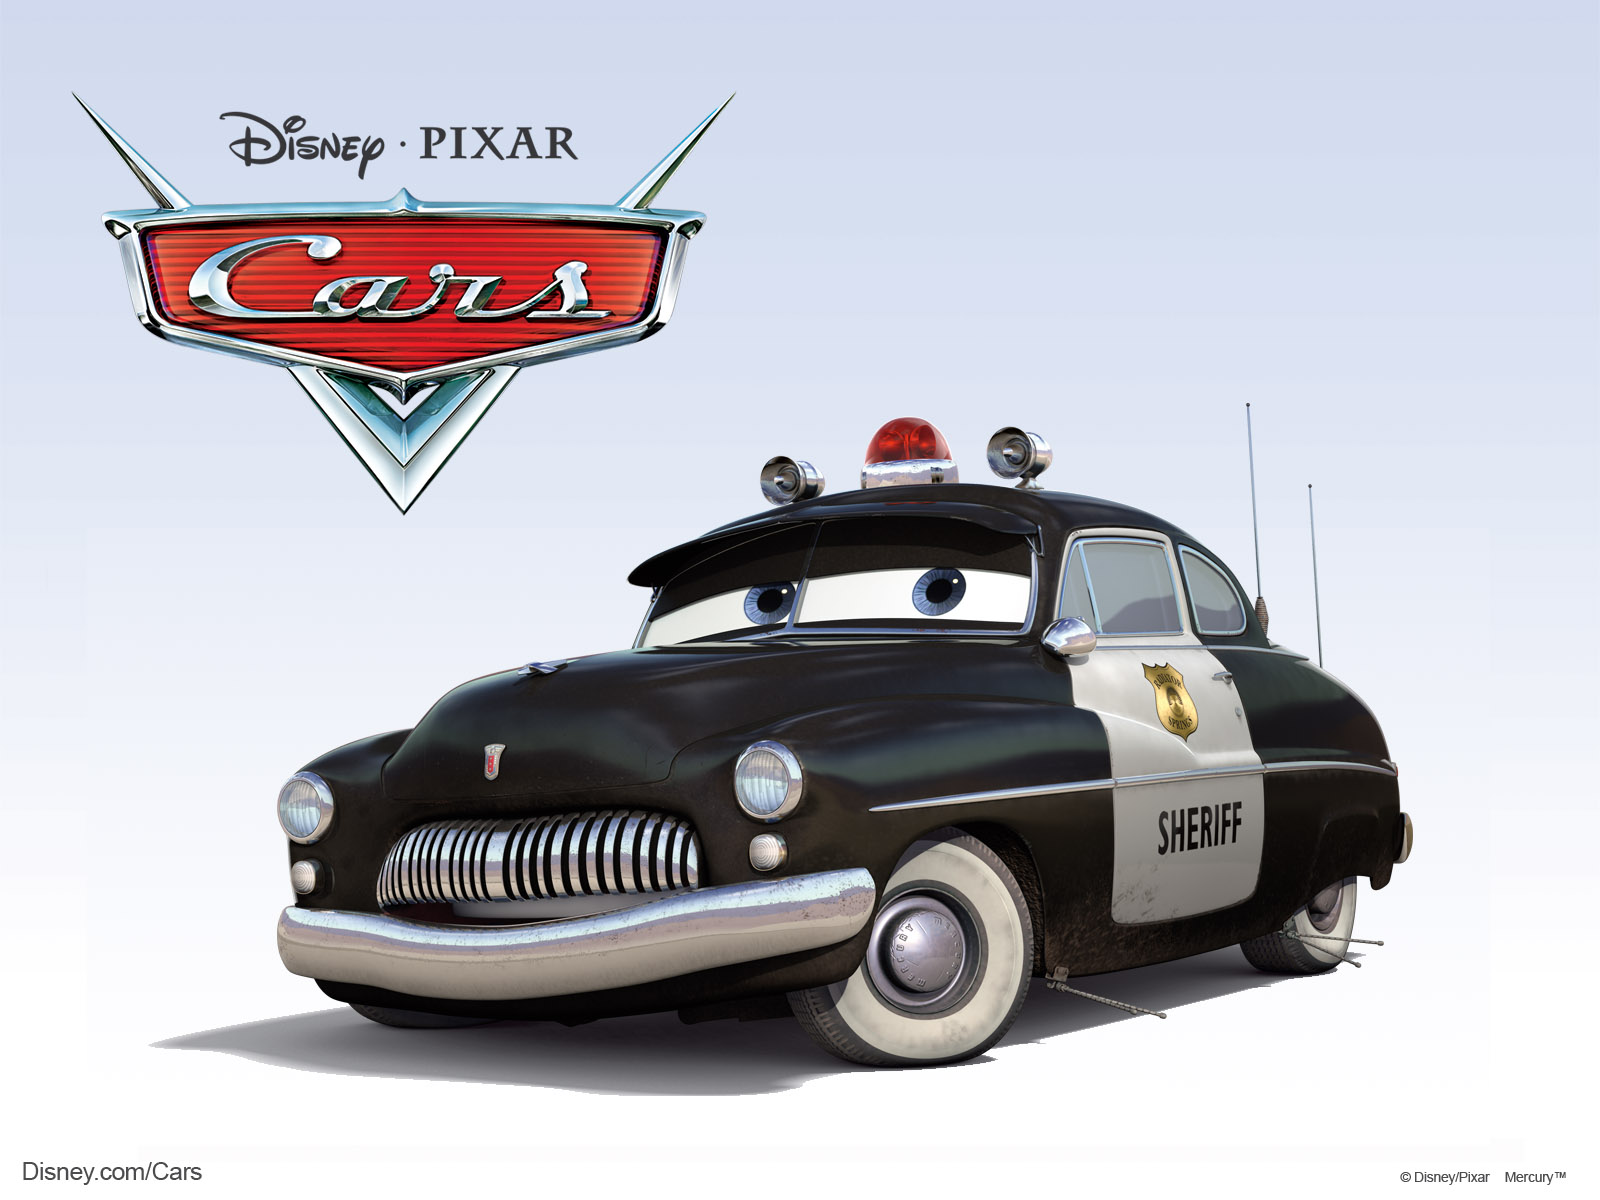 Sheriff The Police Car From The Disney/pixar Cg Animated - Disney Cars  Characters Sheriff - 1600x1200 Wallpaper 